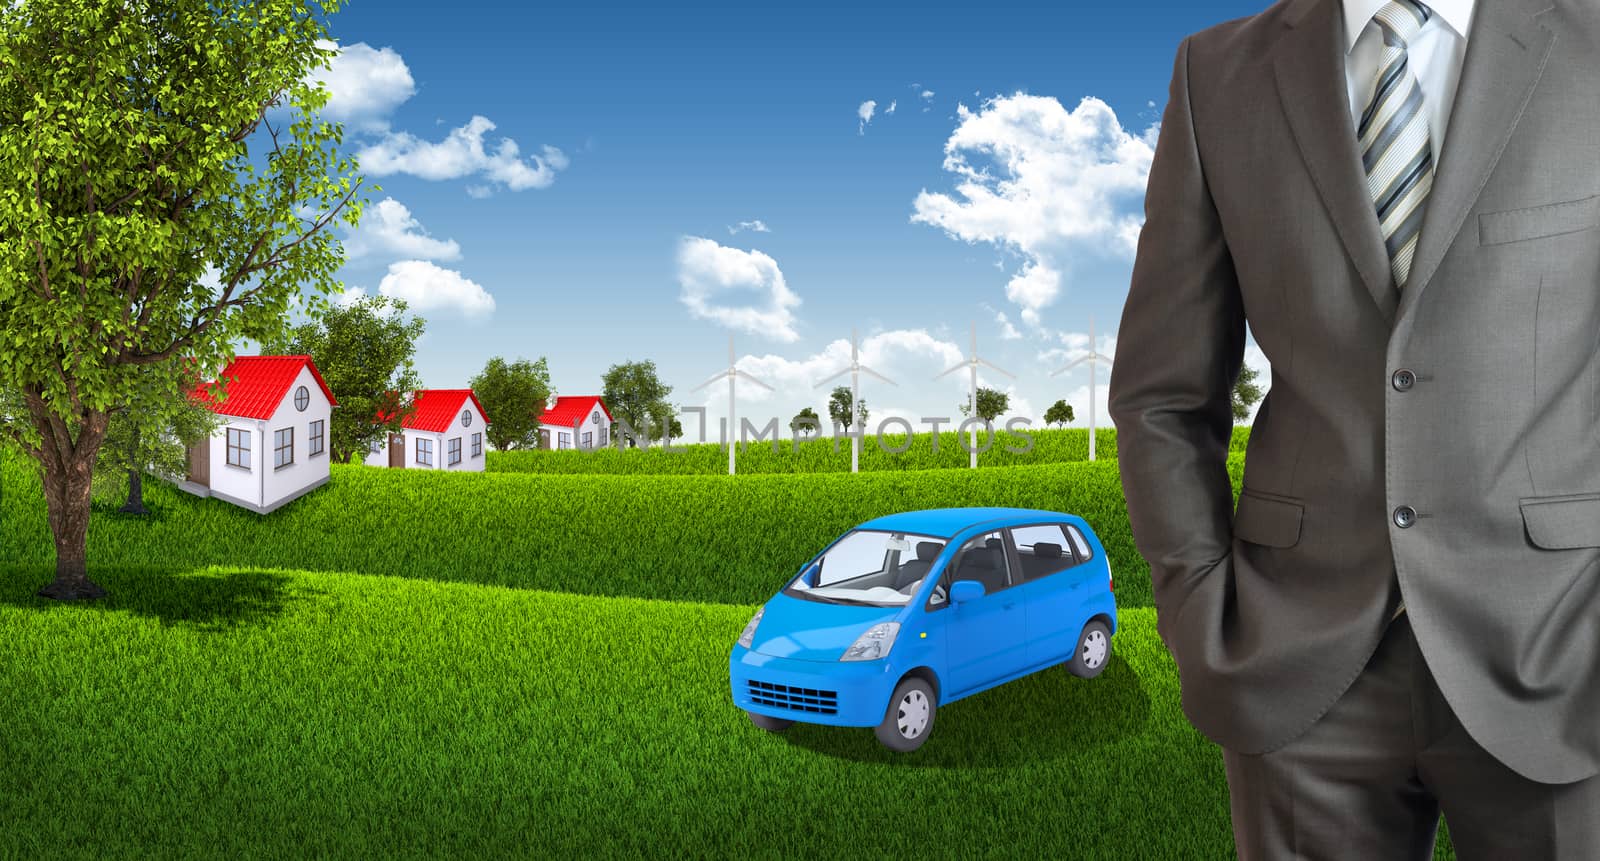 Businessman standing with hands in pockets. Houses and green landscape as backdrop